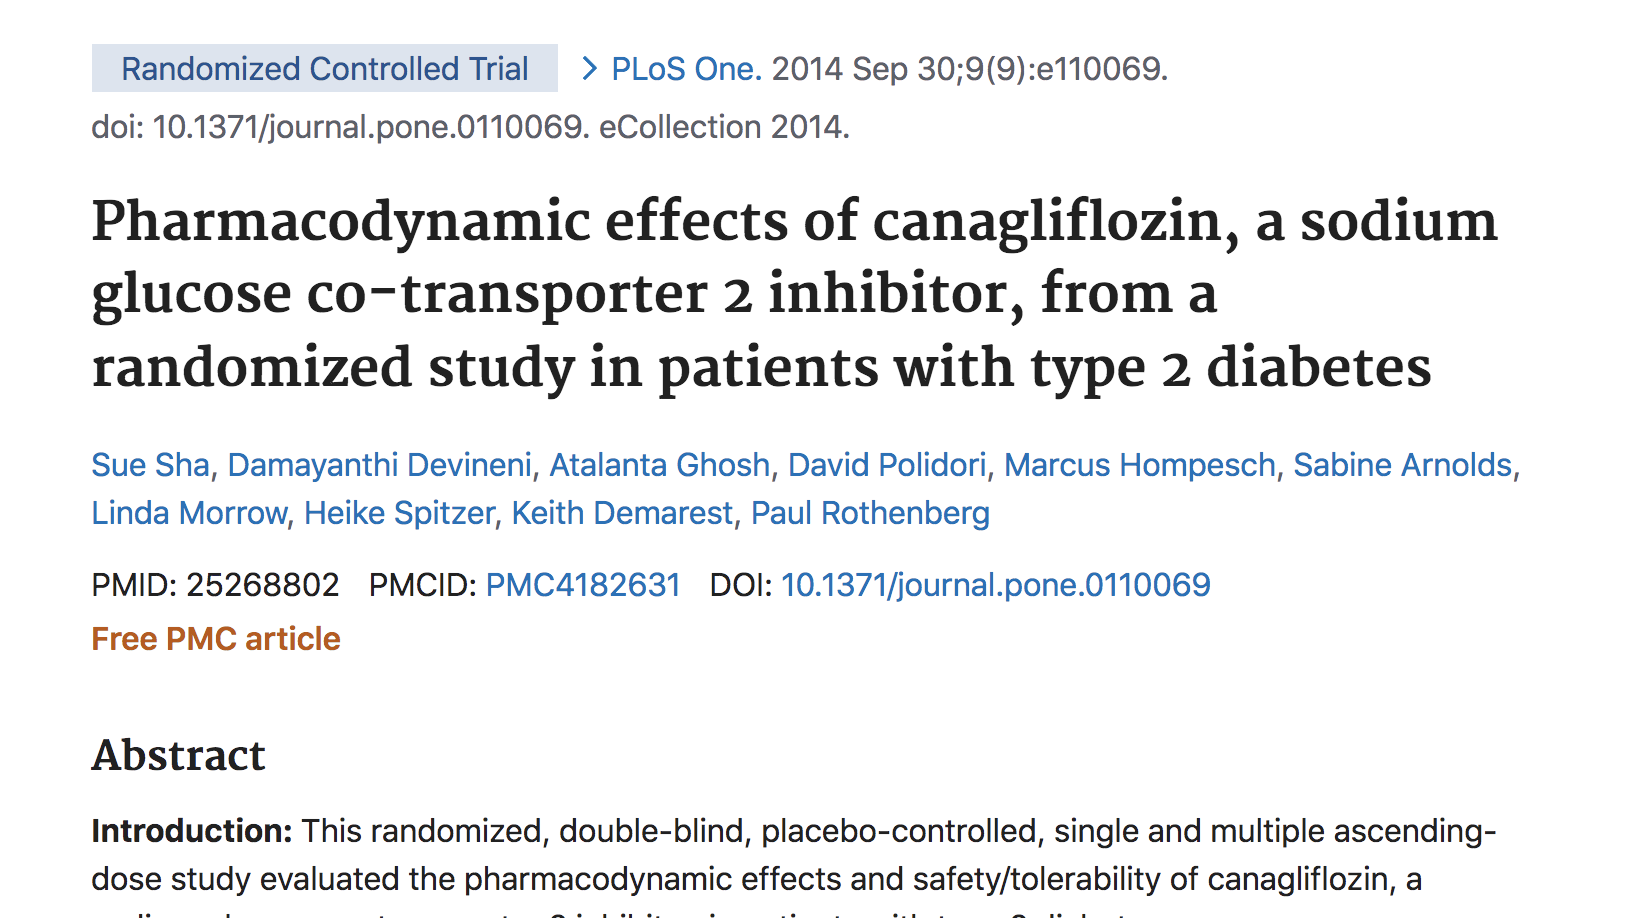 image of Pharmacodynamic effects of canagliflozin, a sodium glucose co-transporter 2 inhibitor, from a randomized study in patients with type 2 diabetes